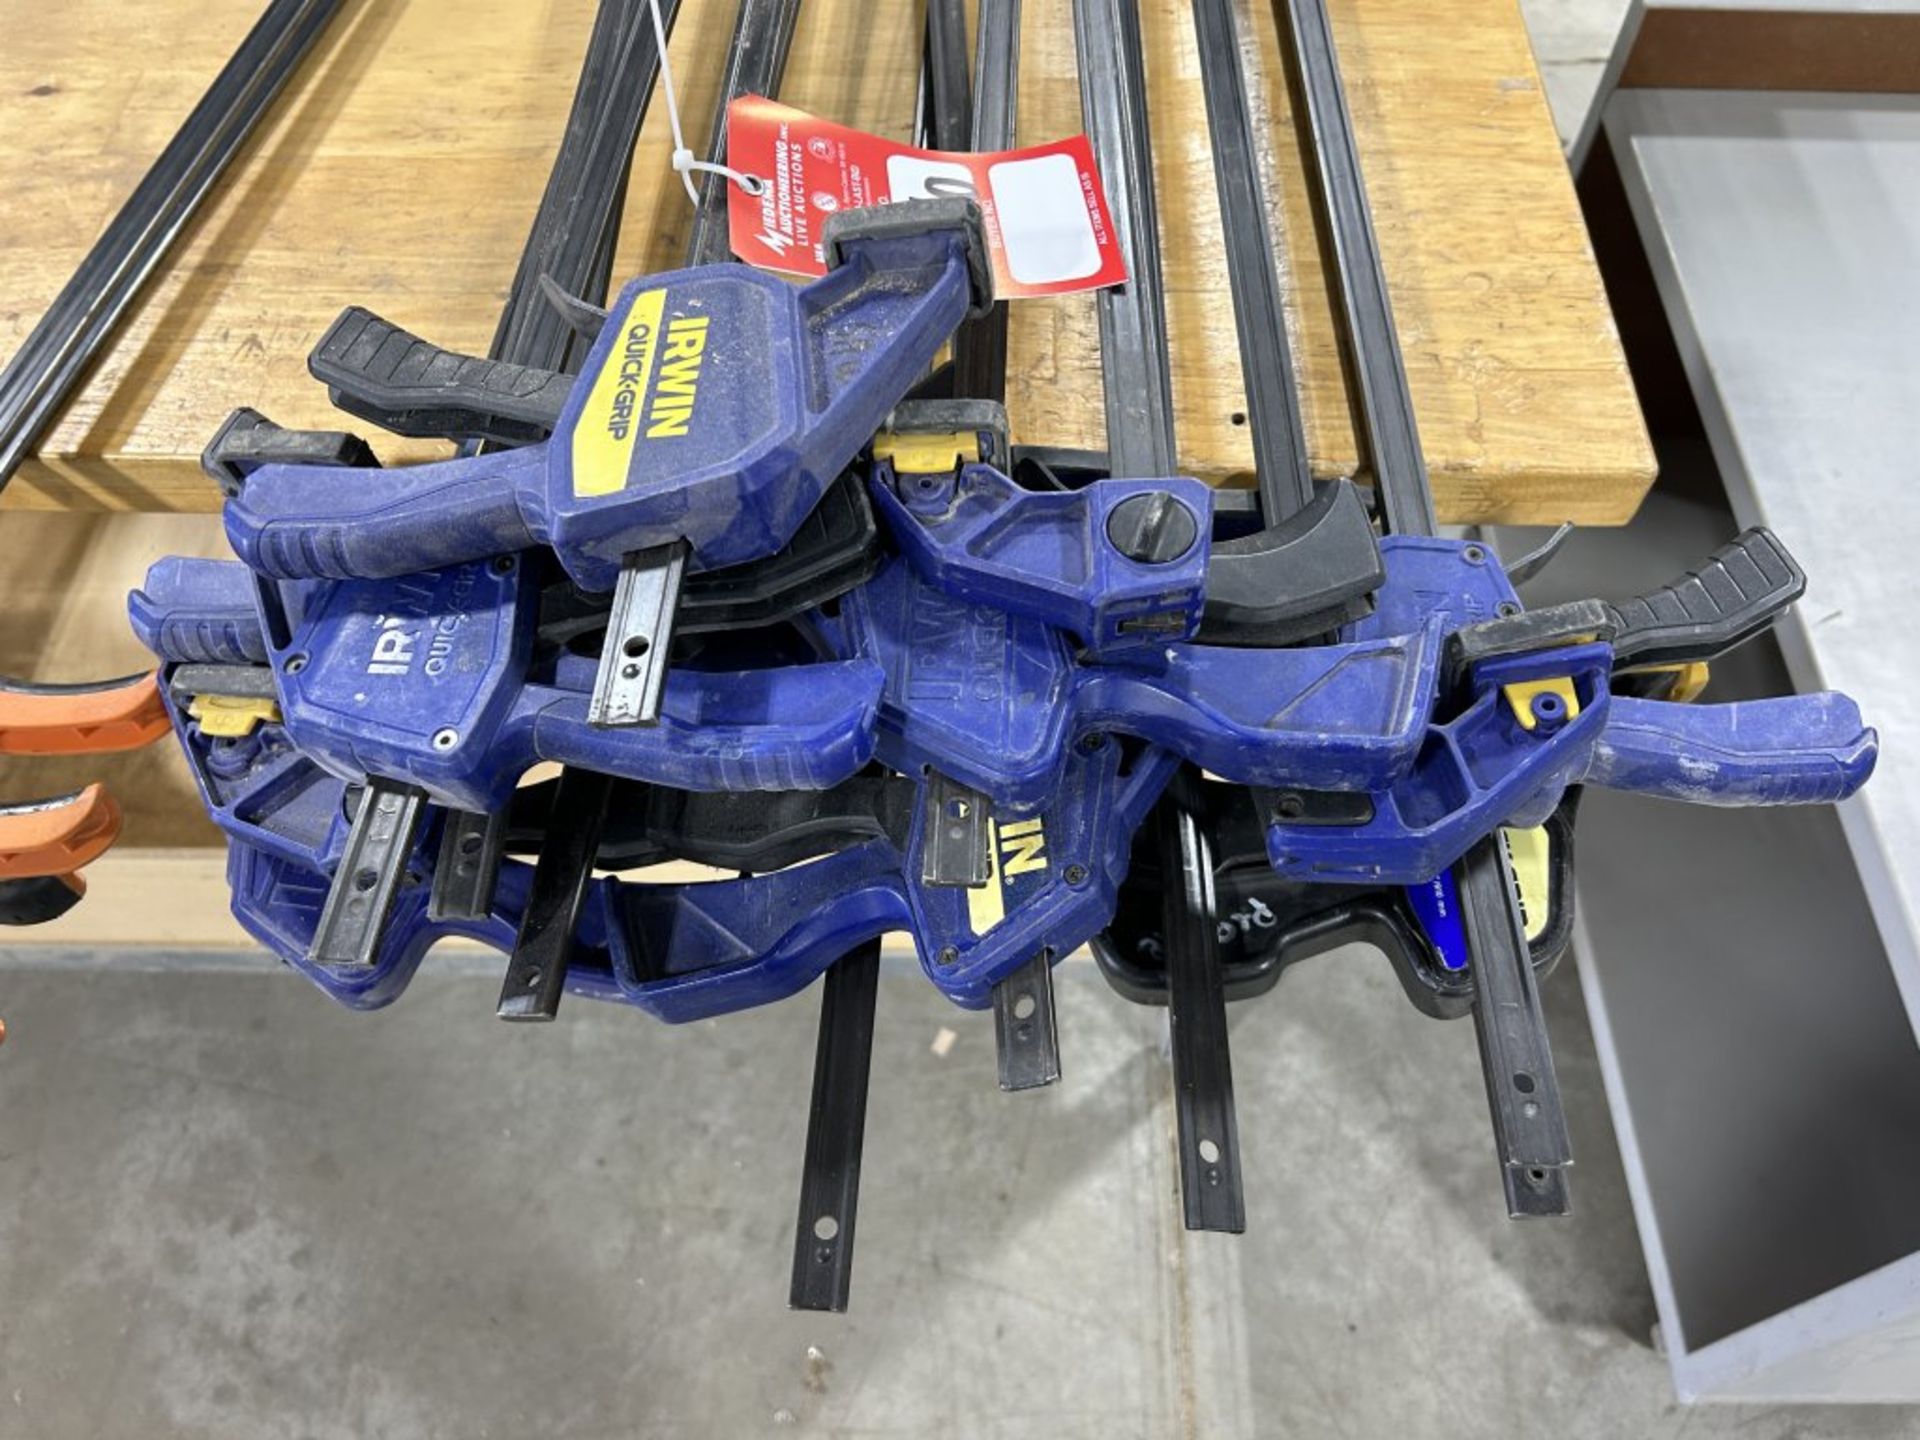 (15) LARGE 36'' QUICK GRIP CLAMPS, 13 ARE IRWIN BRAND, 2 ARE JORGENSEN BRAND - Image 2 of 4